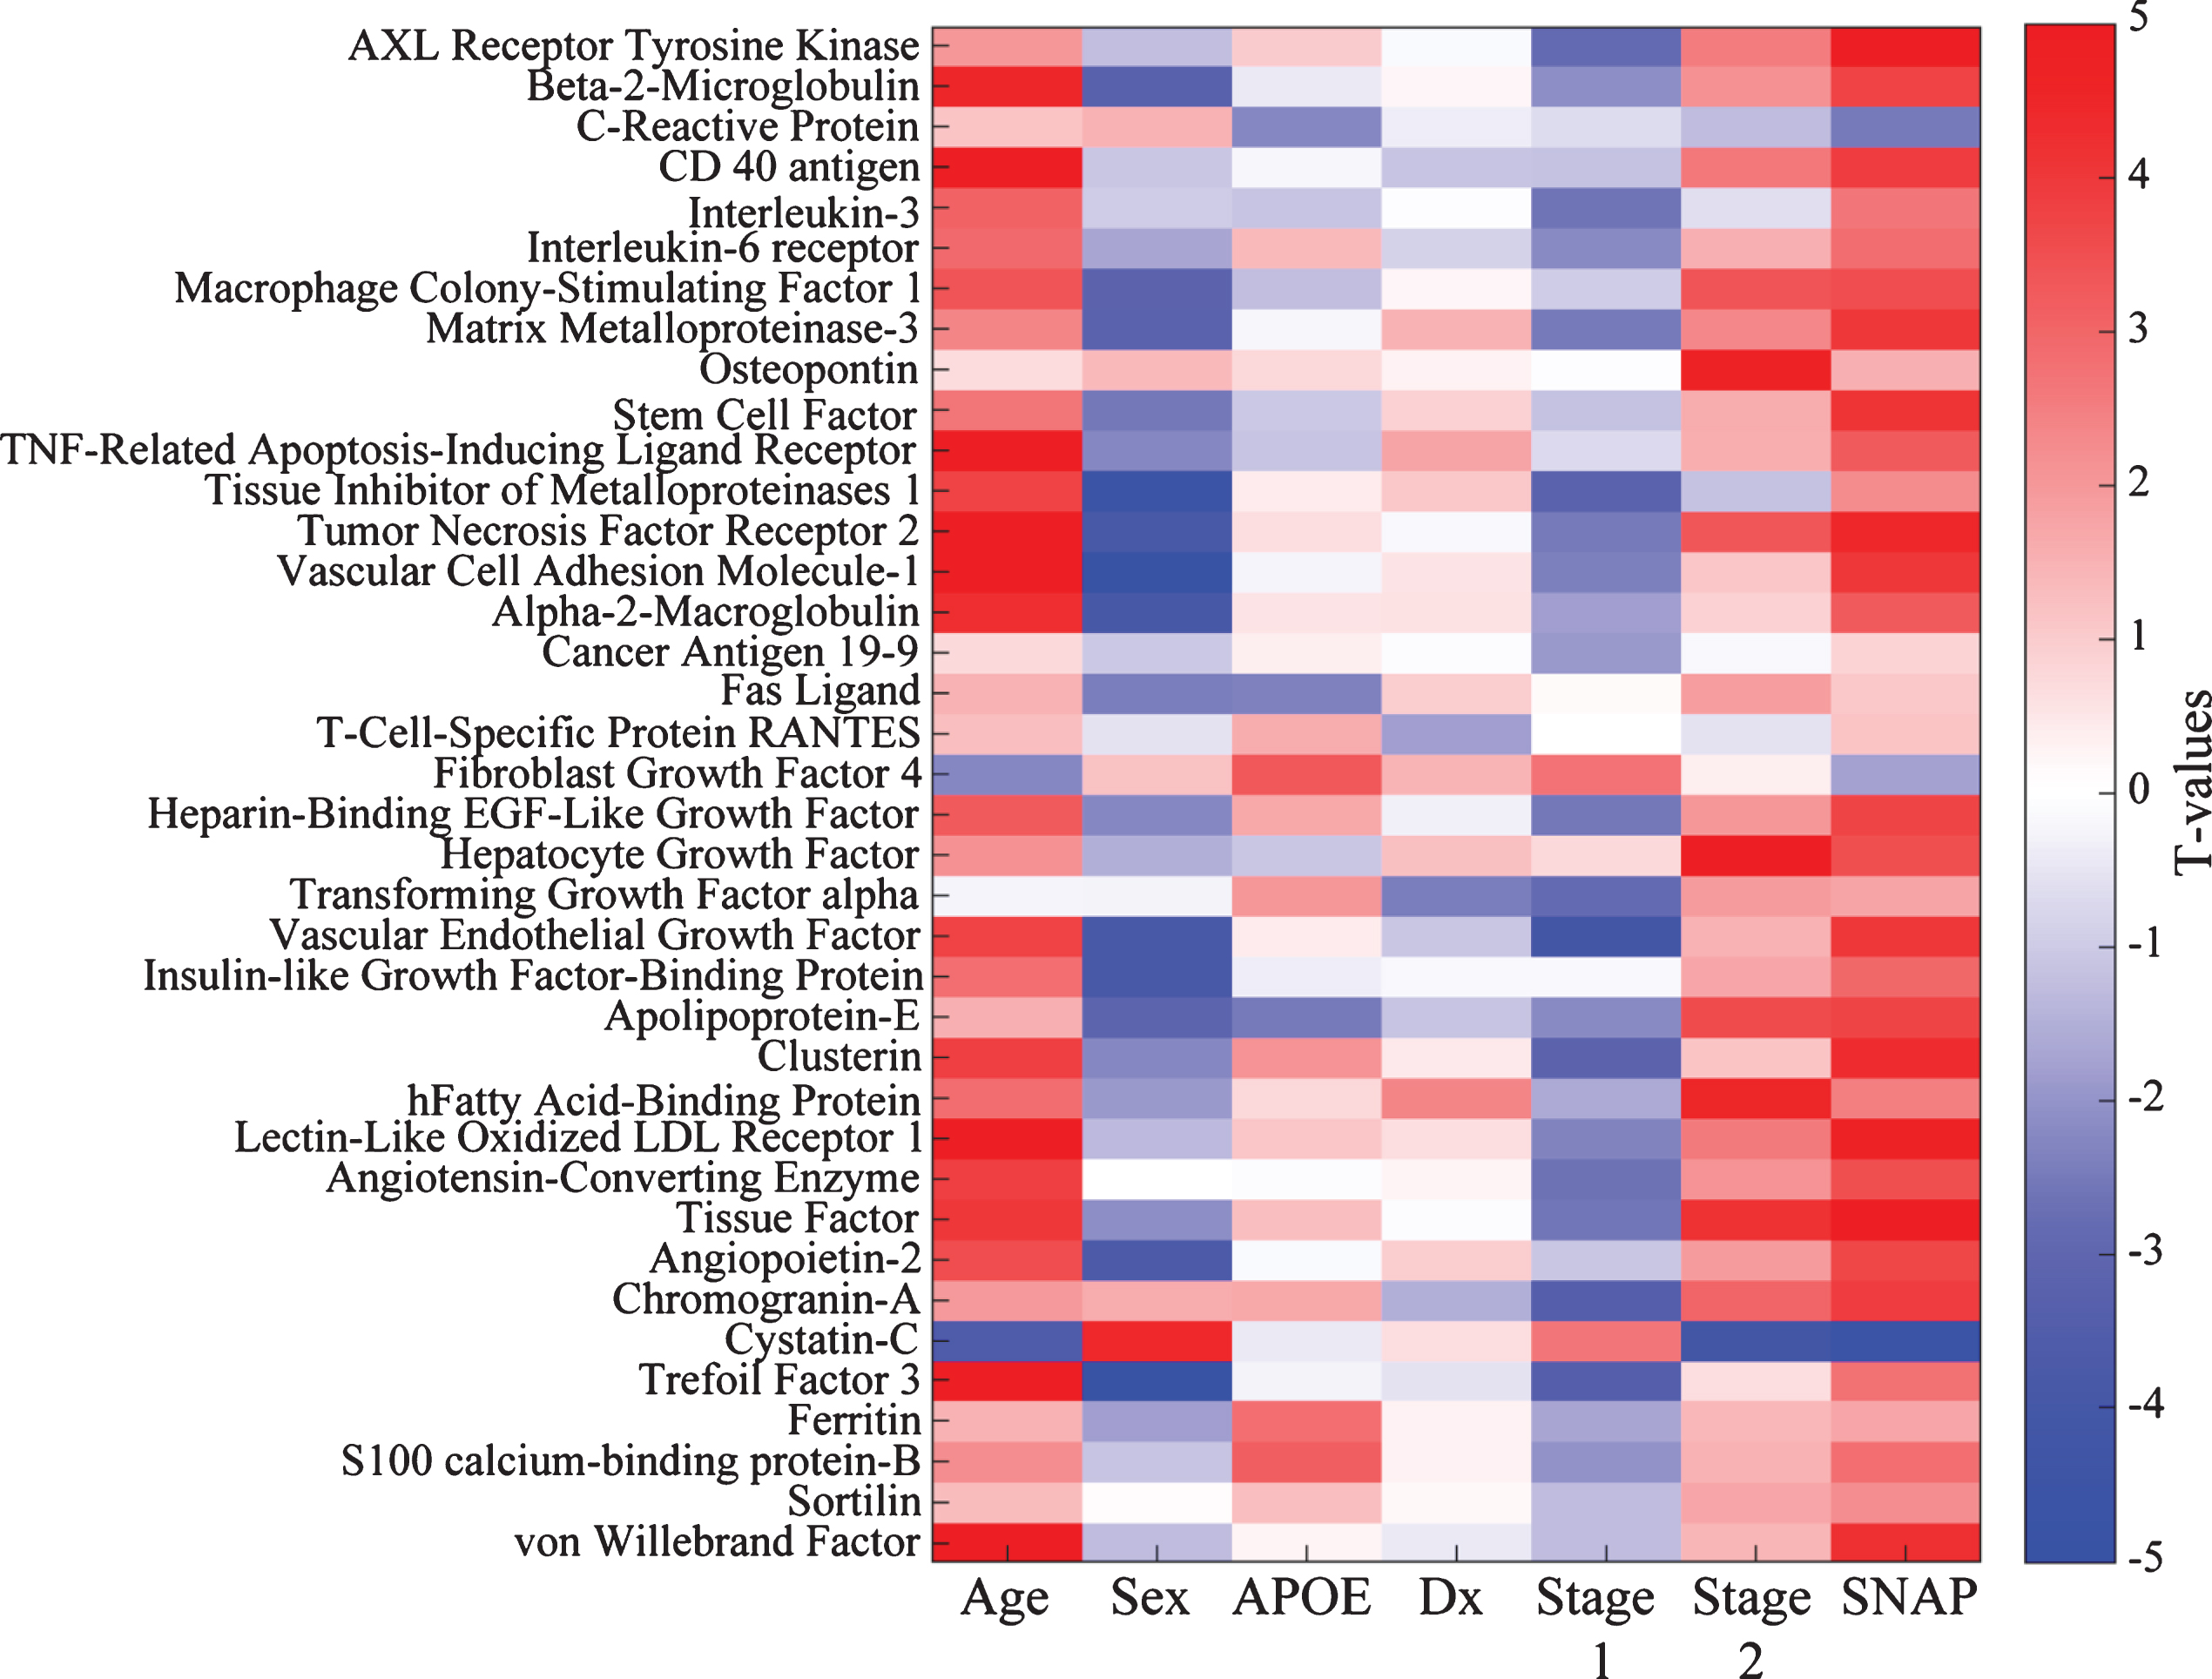 Bayes factor analysis identifies 38 ADNI CSF markers potentially associated with pathological stage. Shown is a matrix representation of linear regression models predicting association of 38 CSF marker levels with pathological stage with adjustment for age, gender, clinical diagnostic category, and APOE status. T-values for each association are reported. For categorical variables, the results are shown as comparisons against a reference. For gender, the reference category is male; for APOE it is non-carriage of ɛ4; for diagnosis (Dx), healthy control; and for pathological stage, Stage 0 (no abnormality).